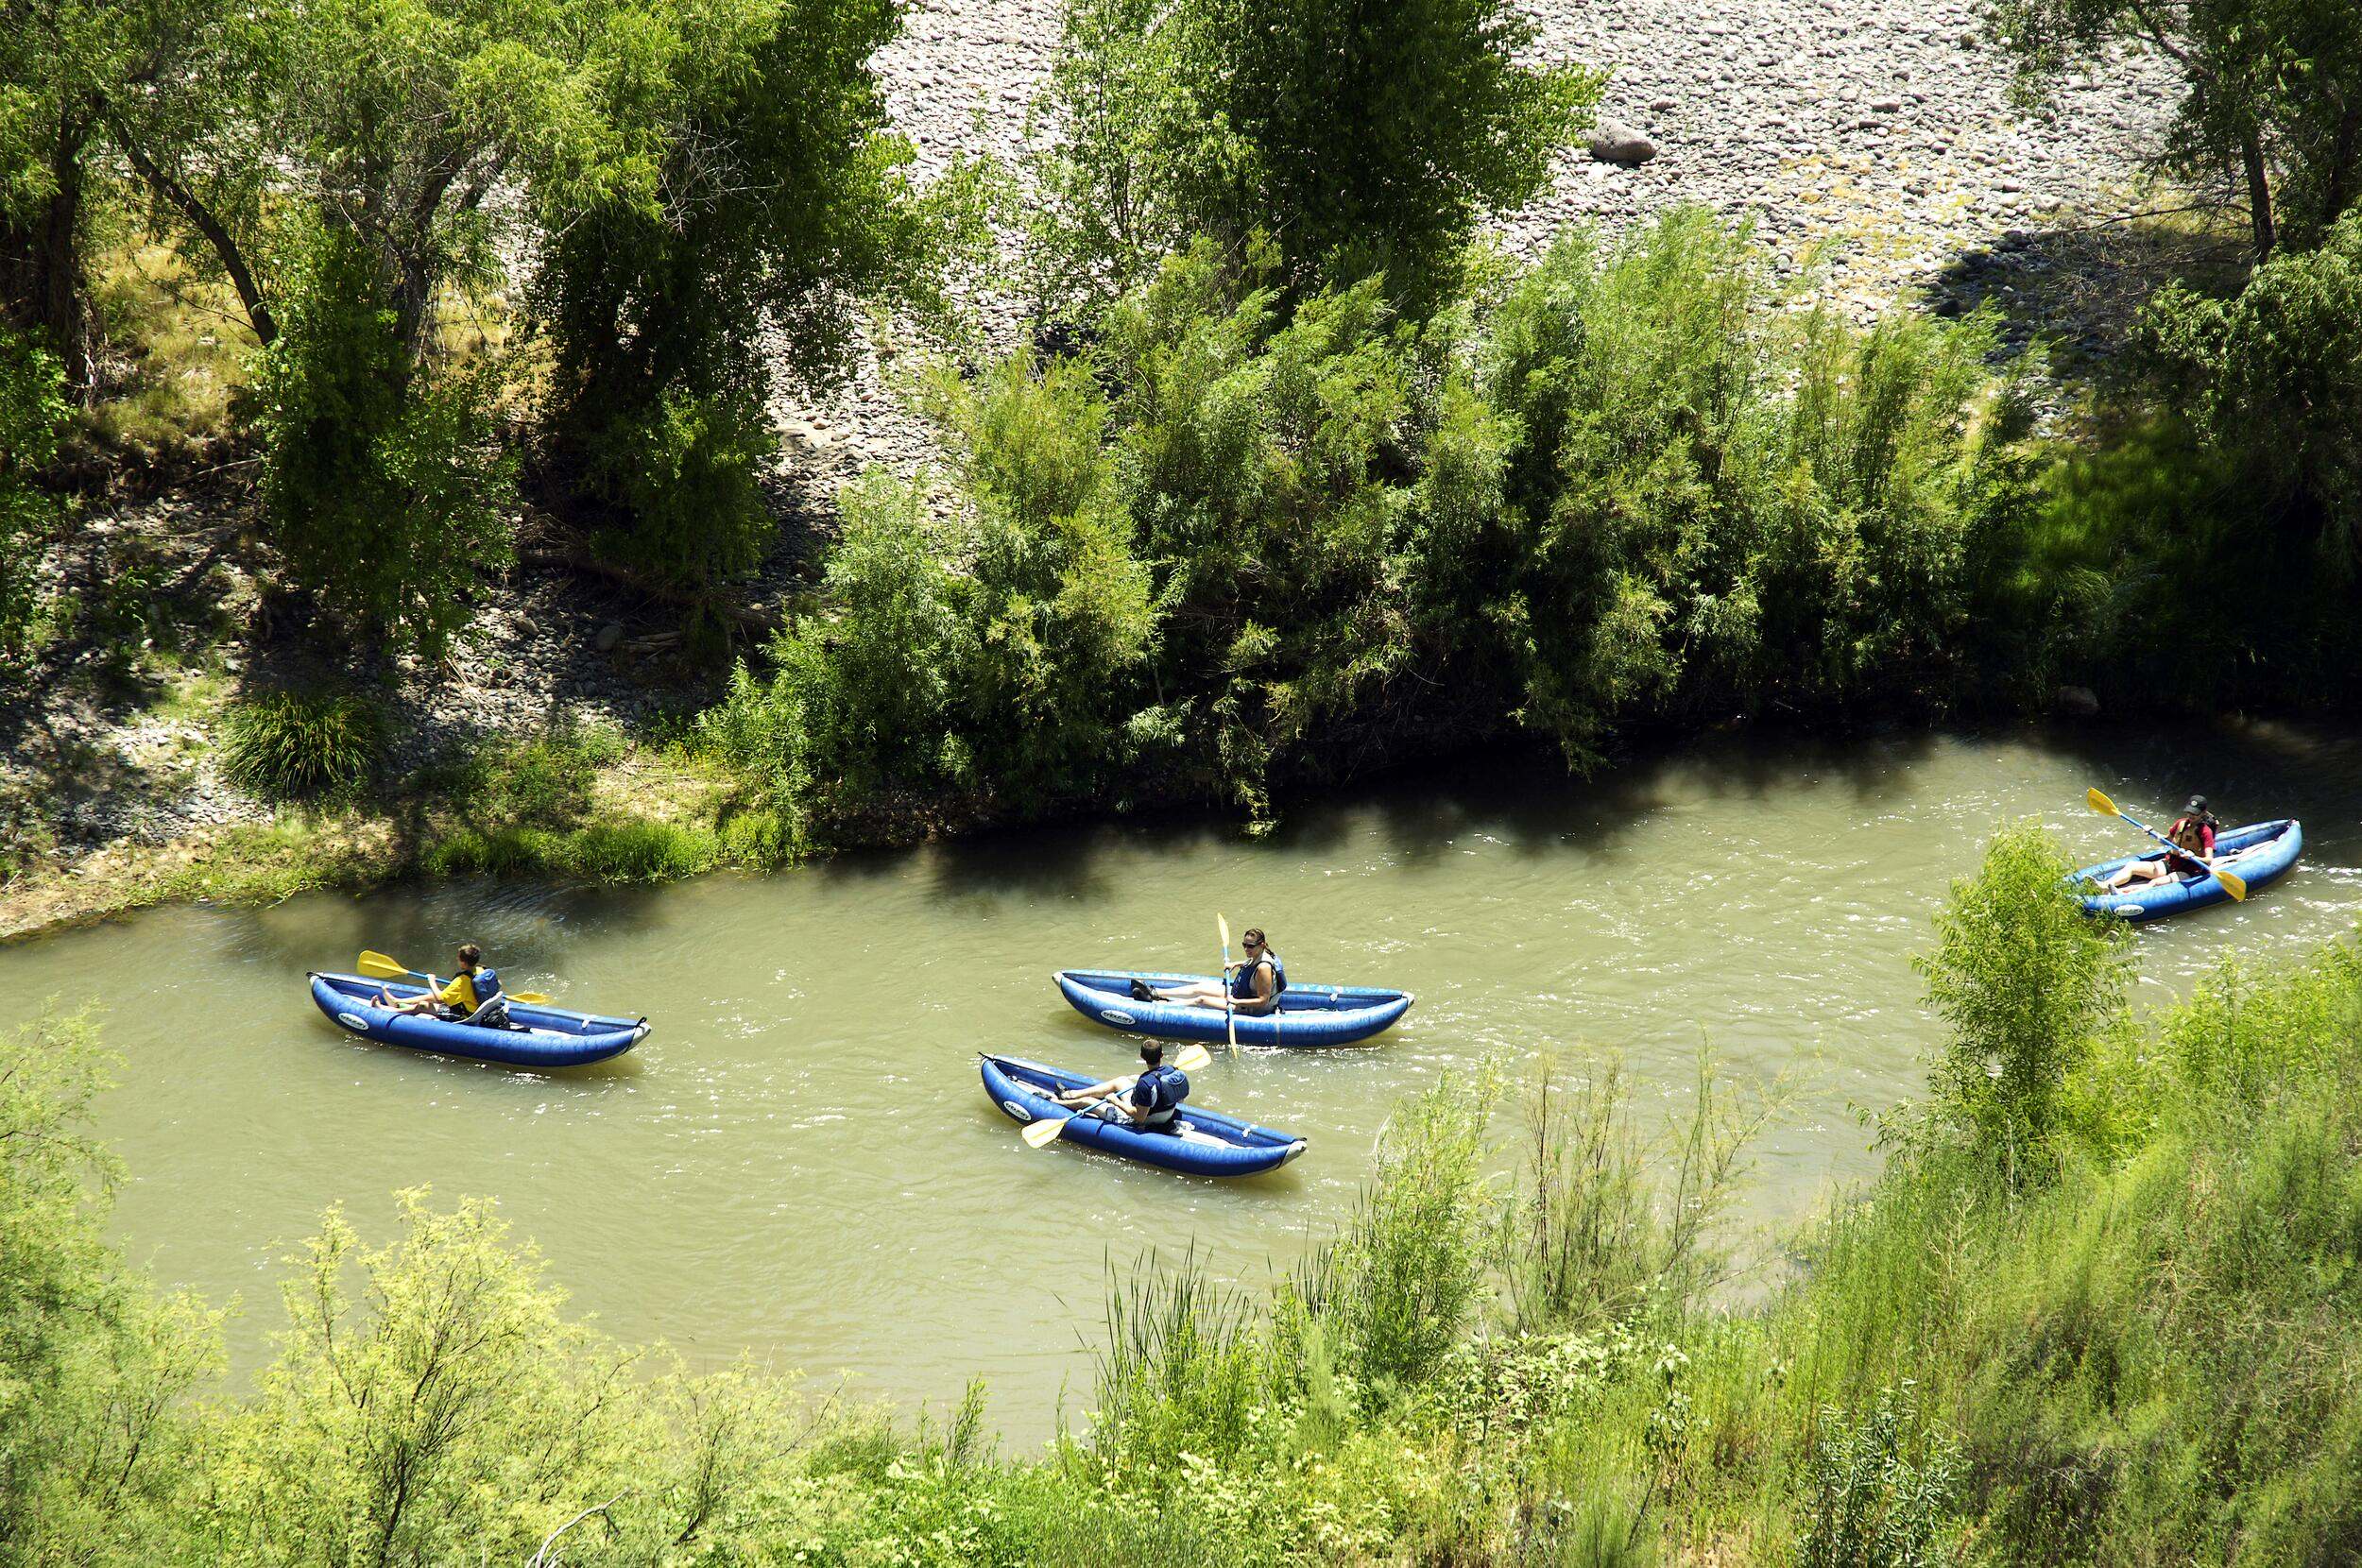 View from above of three individuals in blue kayaks on a stream with green vegetation surrounding it.